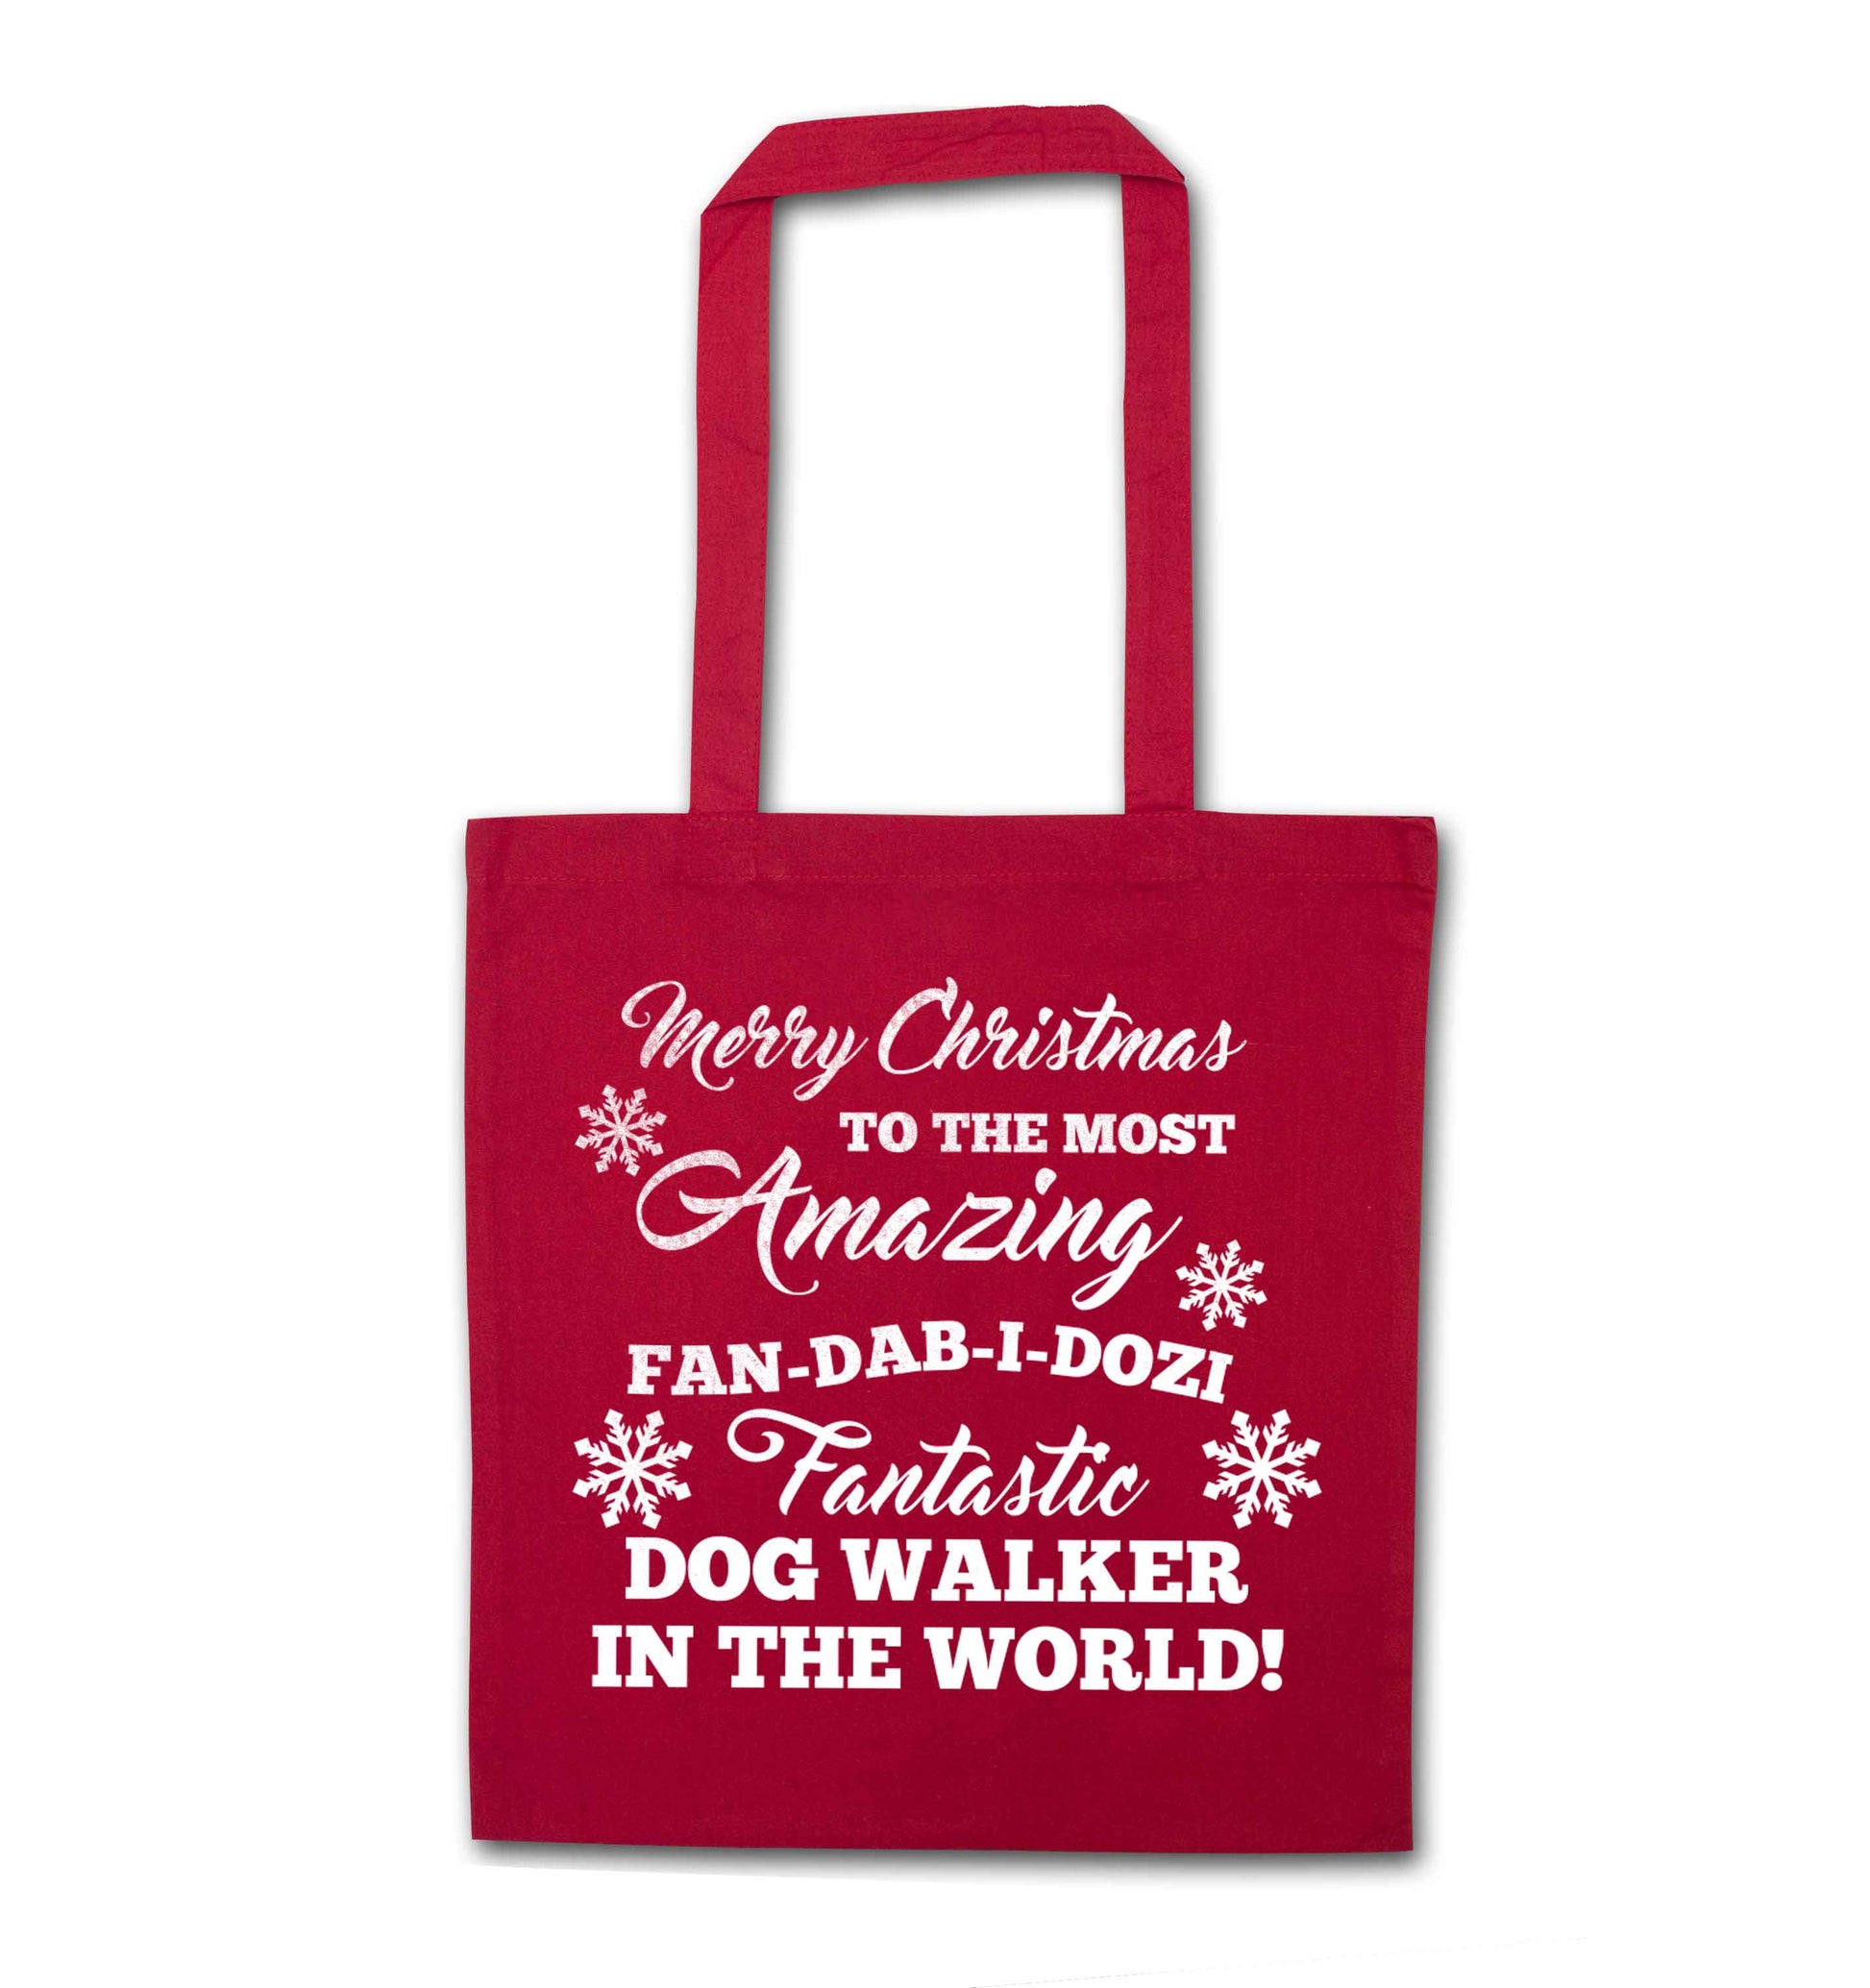 Merry Christmas to the most amazing fan-dab-i-dozi fantasic dog walker in the world red tote bag